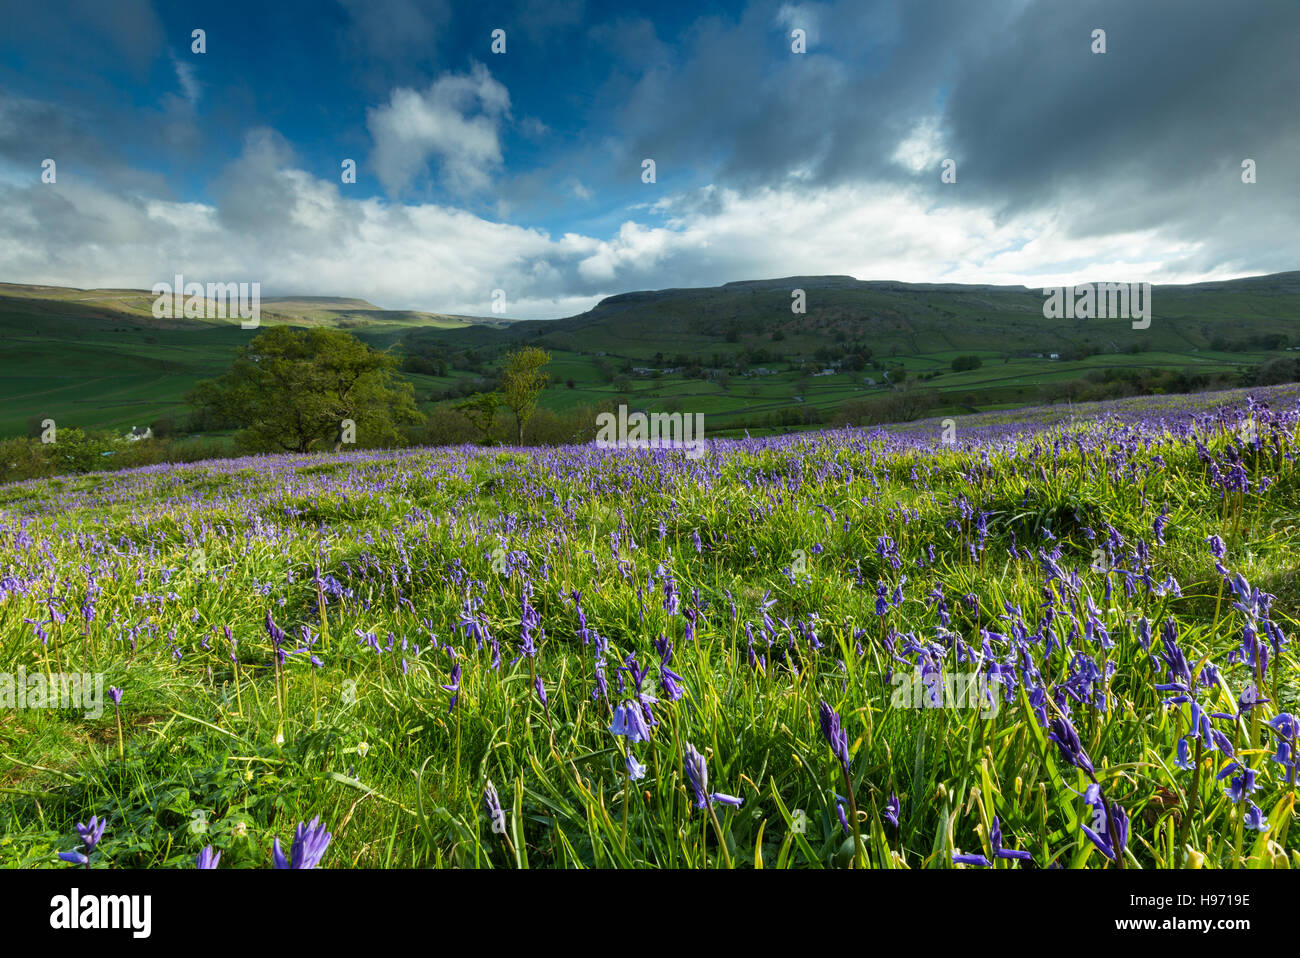 View across field of bluebells at Wharfe and Oxenber Woods, near Austwick and Wharfe in the Yorkshire Dales, UK Stock Photo